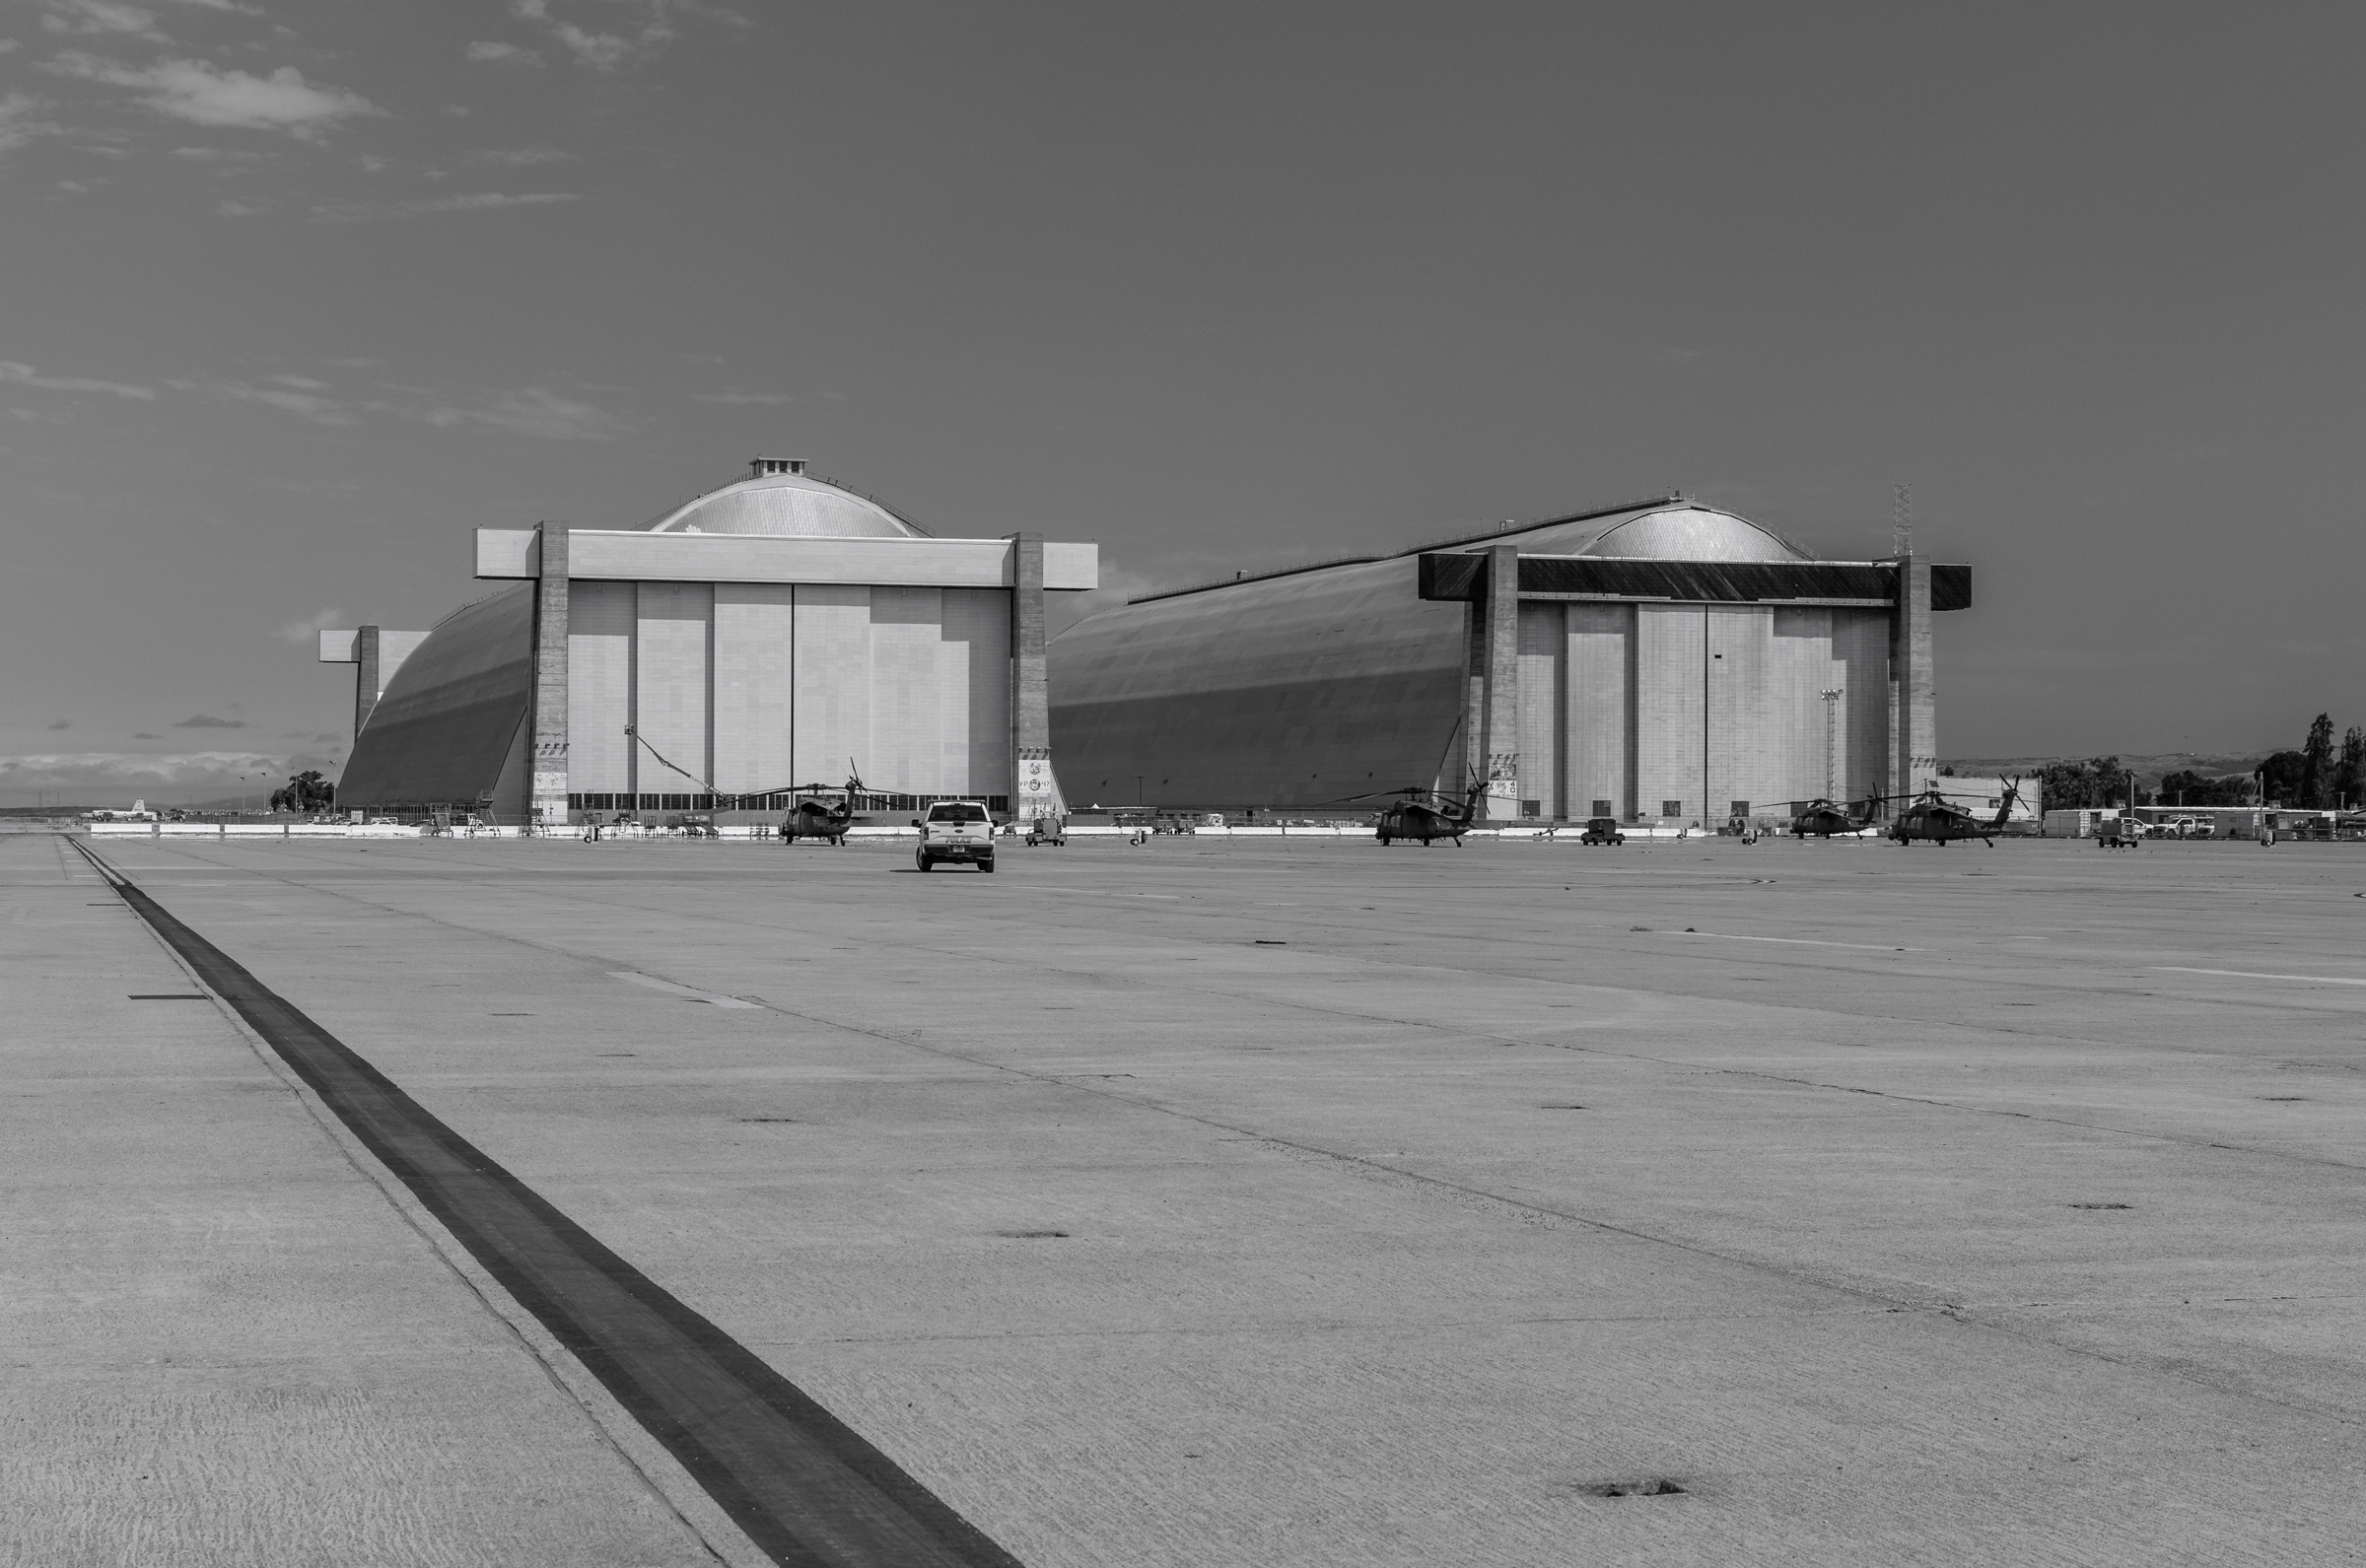 A wide view of Hangars 2 and 3 with a bold runway stripe on the left. A pickup truck and 4 rescue helicopters are parked near the hangar doors.